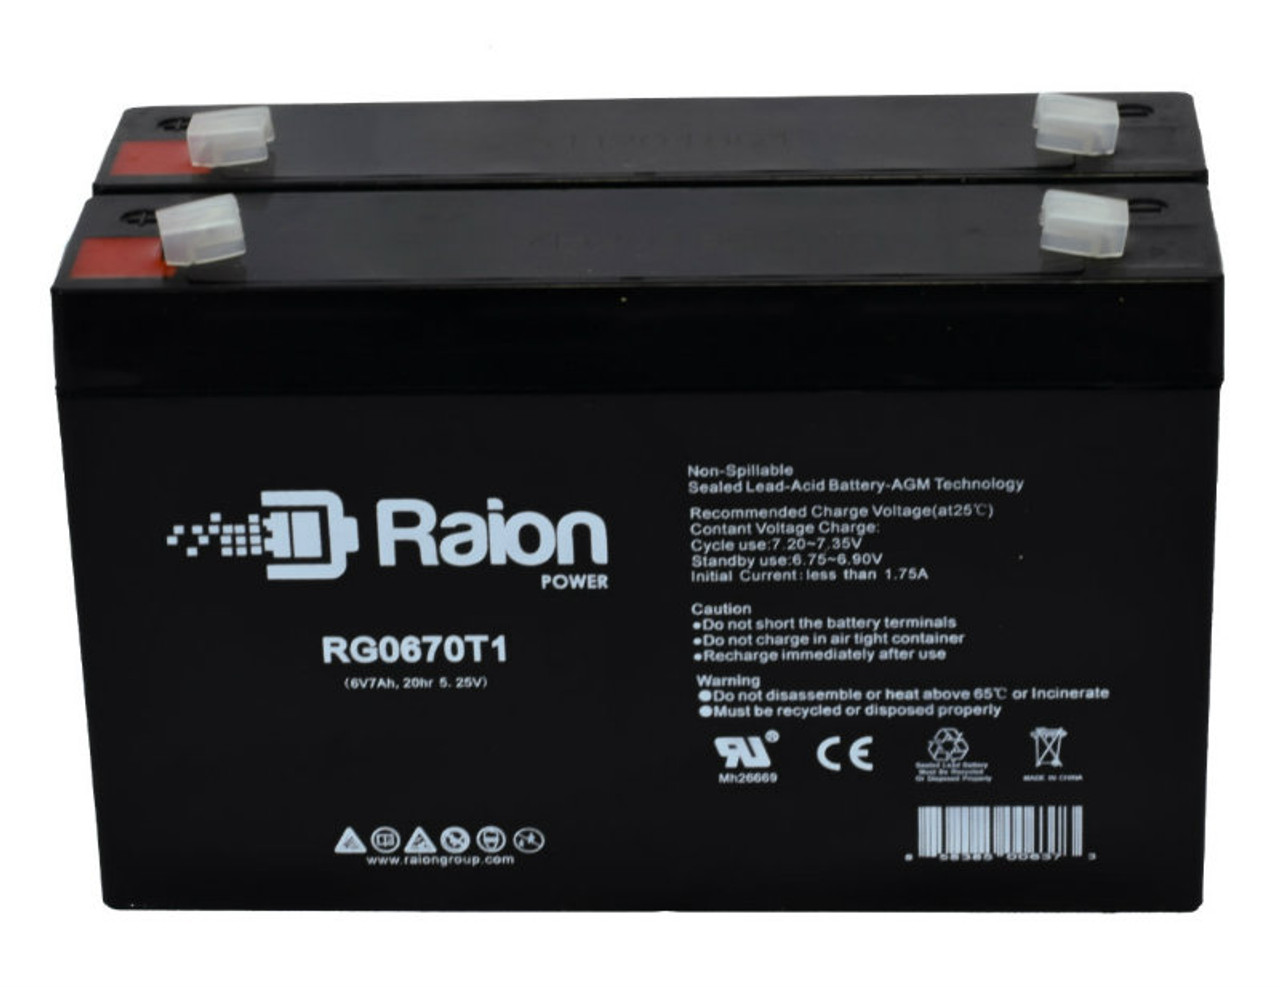 Raion Power RG0670T1 6V 7Ah Replacement Emergency Light Battery for Sure-Lites XR3 - 2 Pack